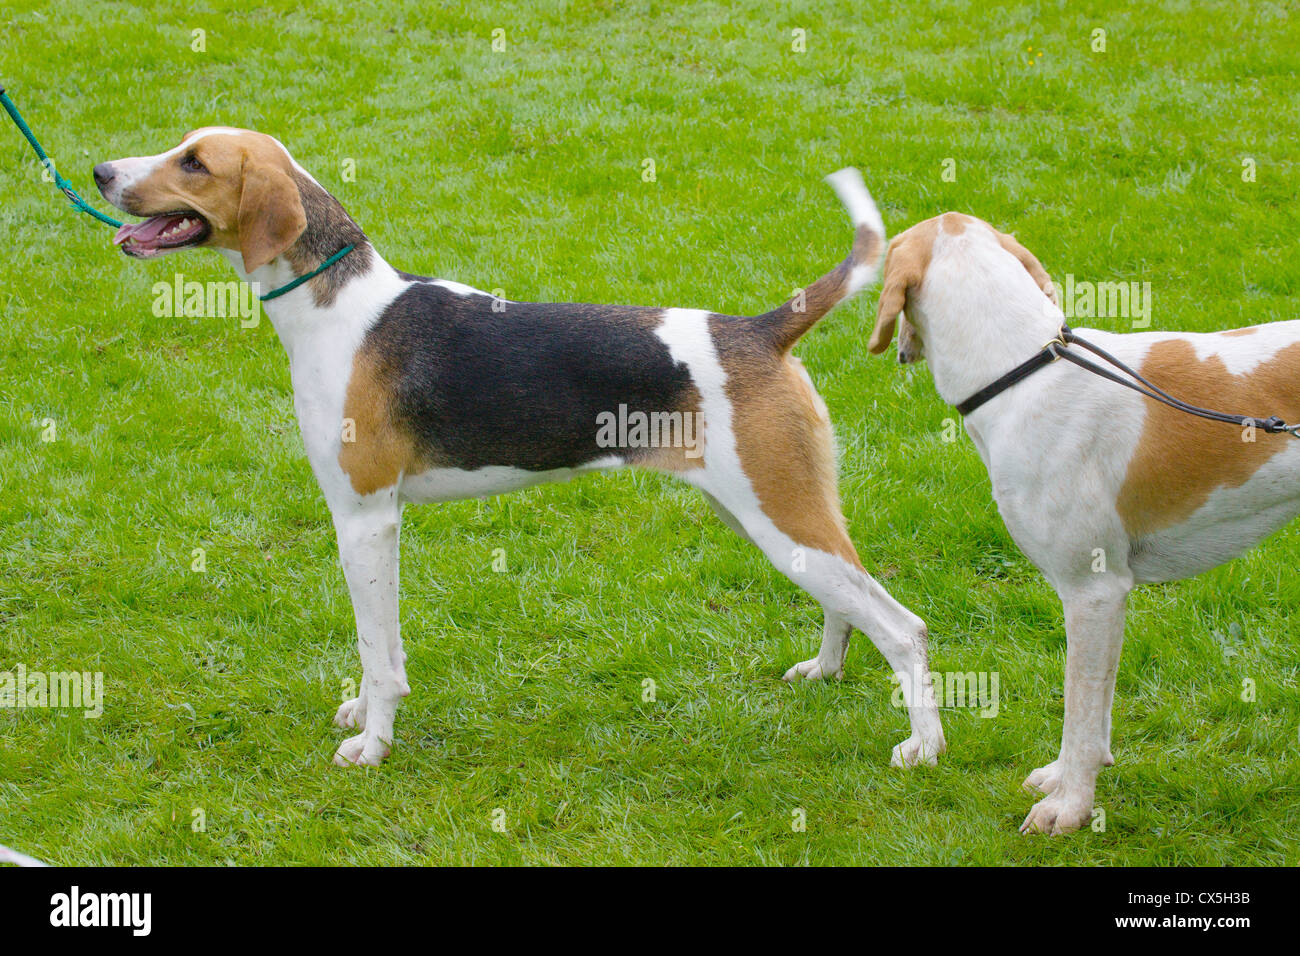 Trail Hound High Resolution Stock Photography and Images - Alamy